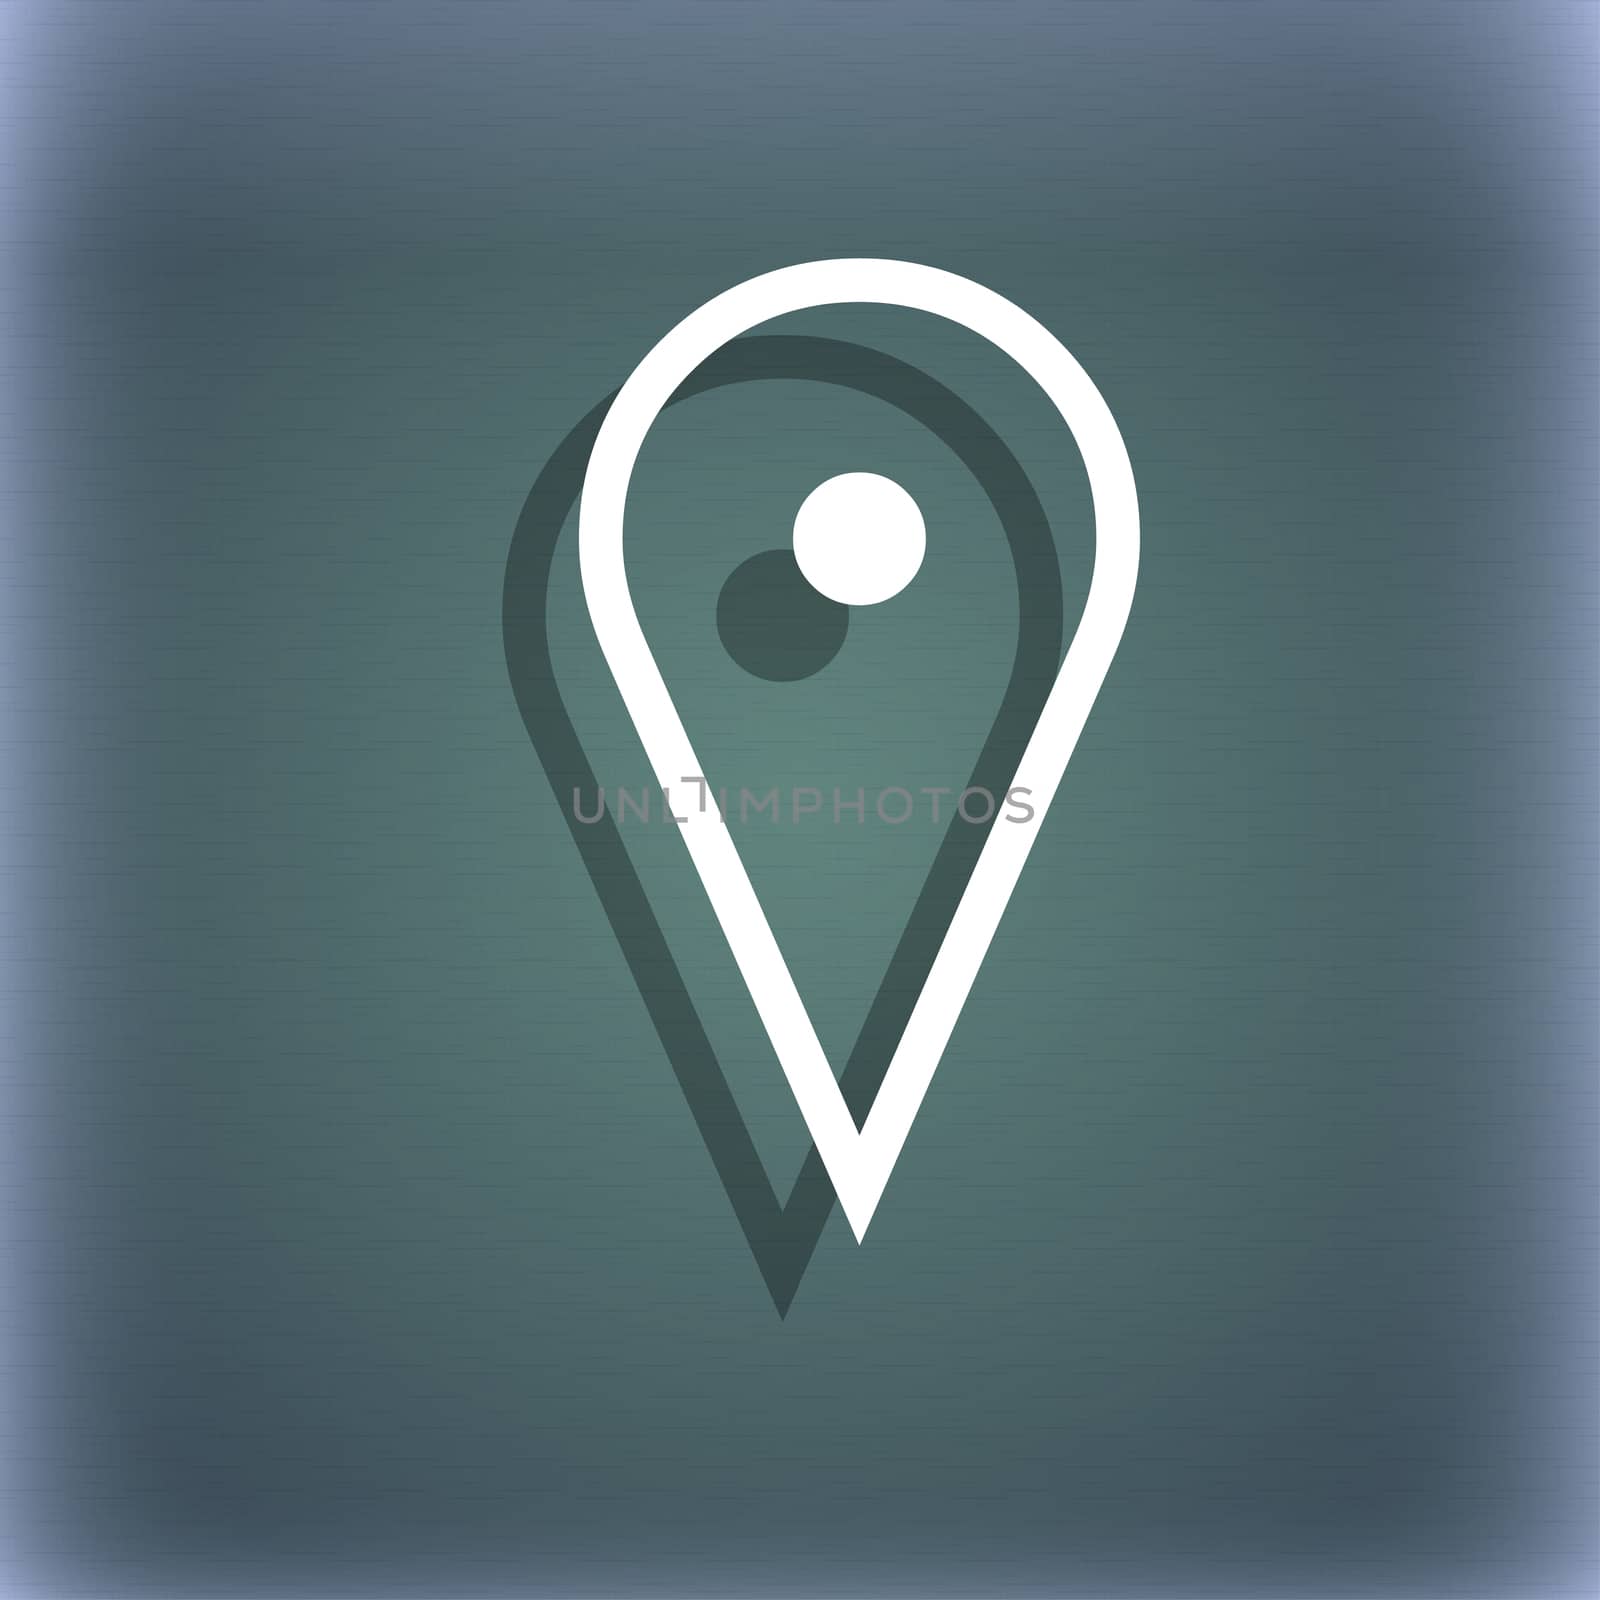 map poiner icon symbol on the blue-green abstract background with shadow and space for your text. illustration